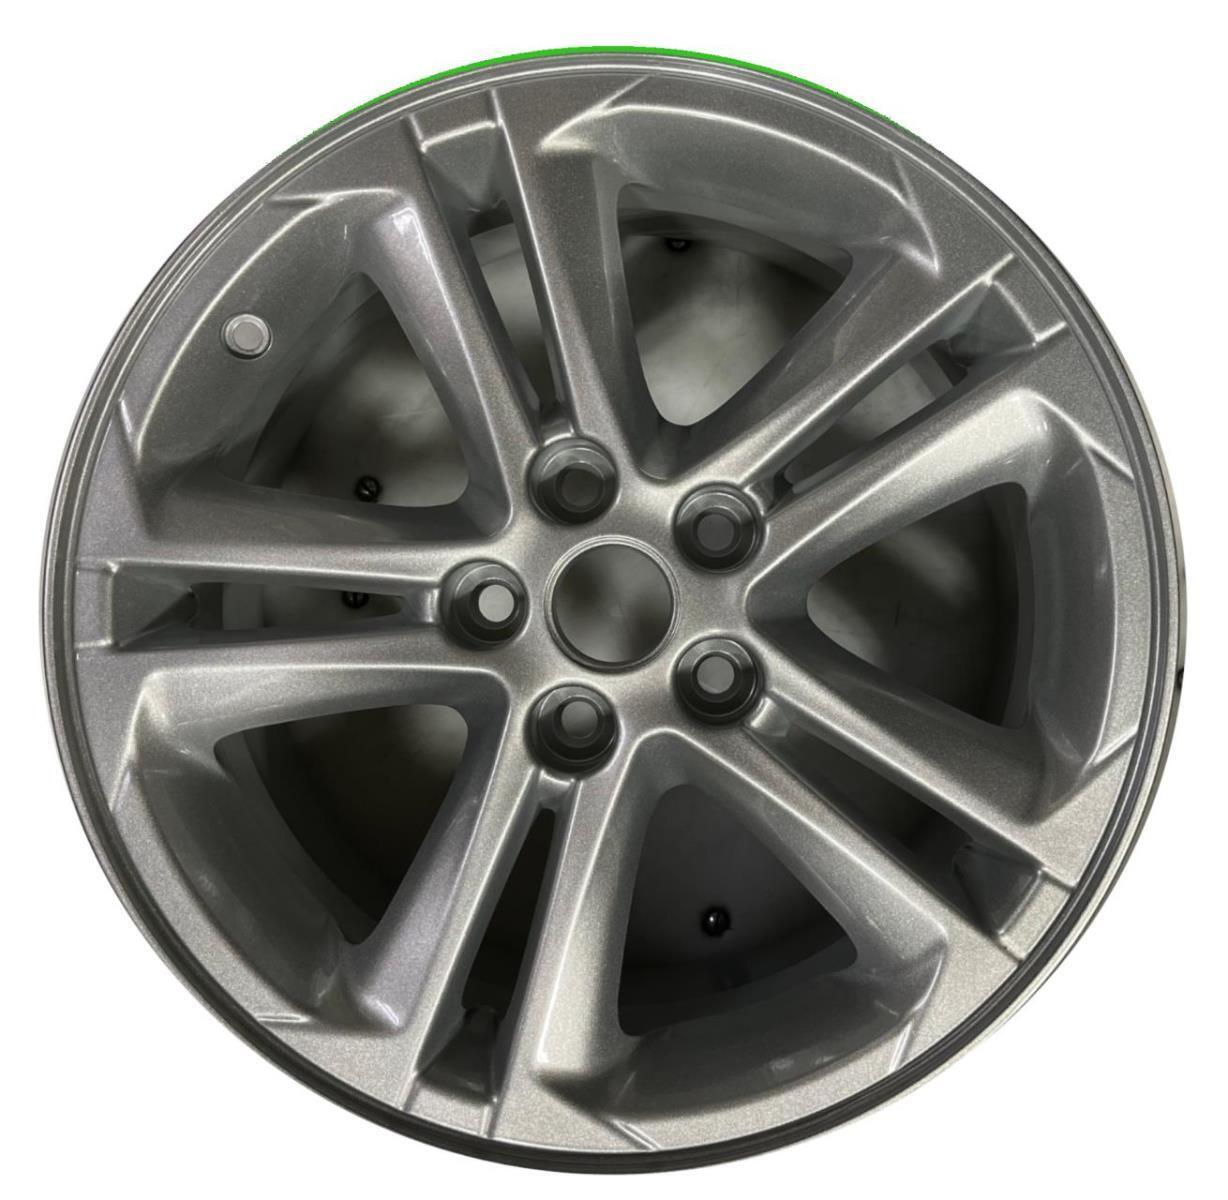 (1) Wheel Rim For Cruze Recon OEM Nice Silver Painted